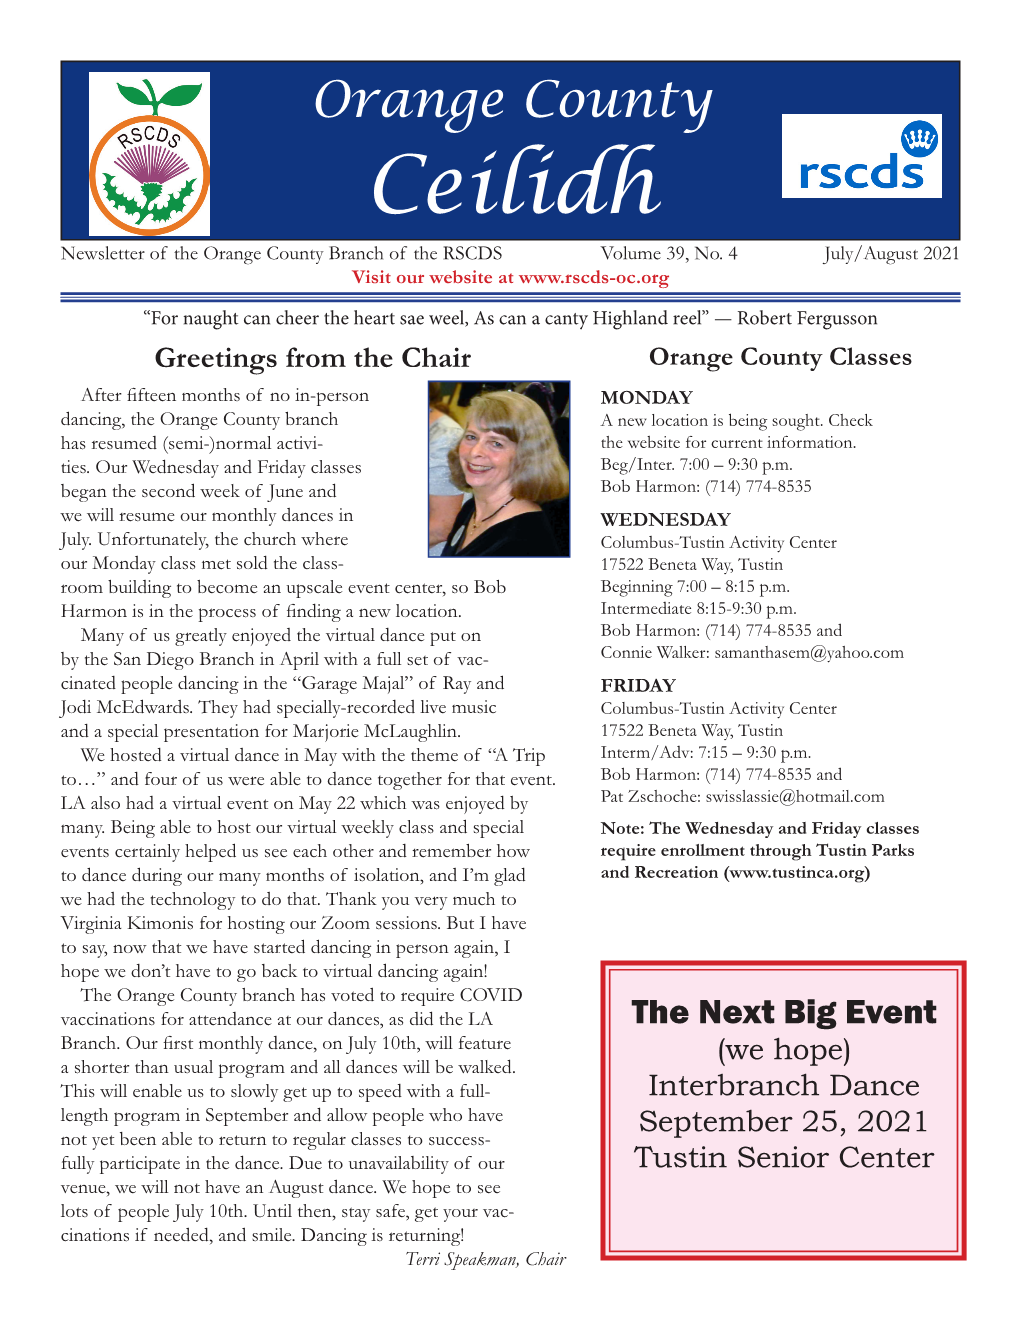 Ceilidh Newsletter of the Orange County Branch of the RSCDS Volume 39, No